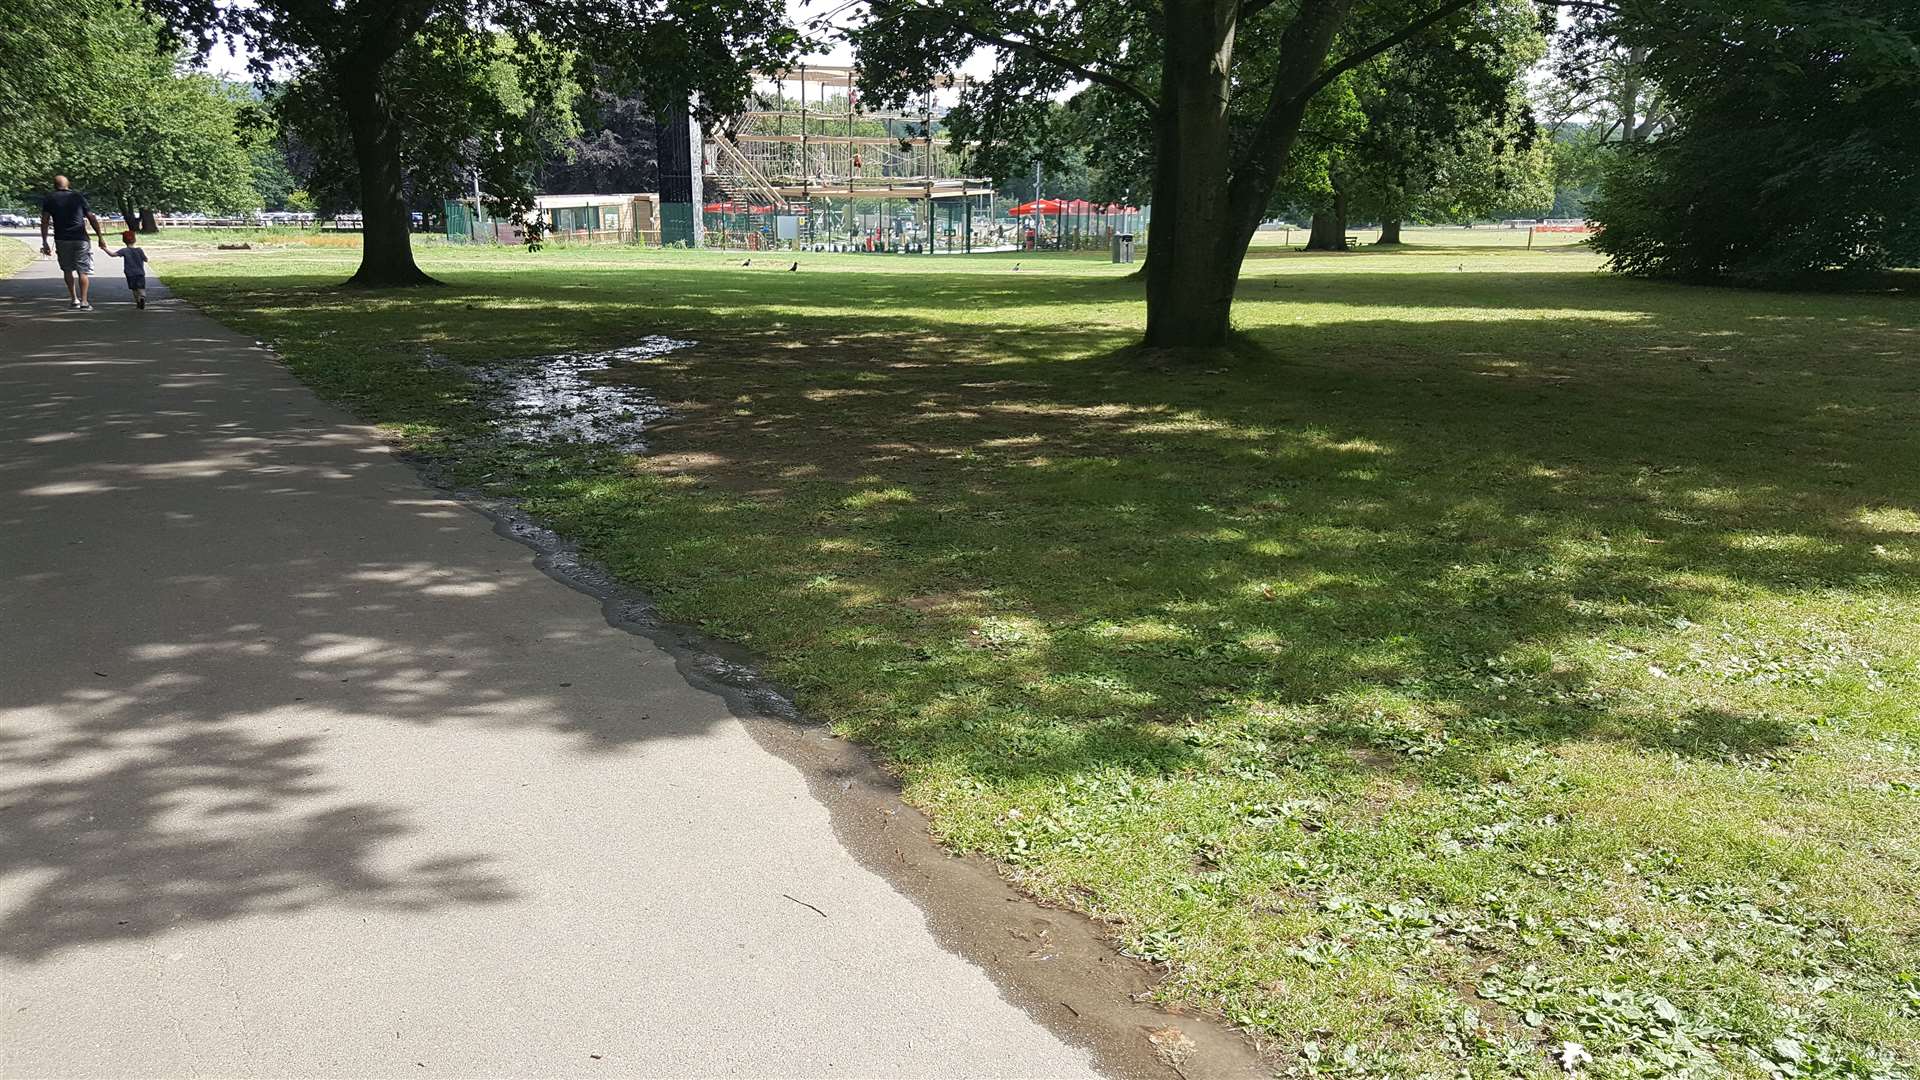 The leak is flowing down the road towards the park (14113879)